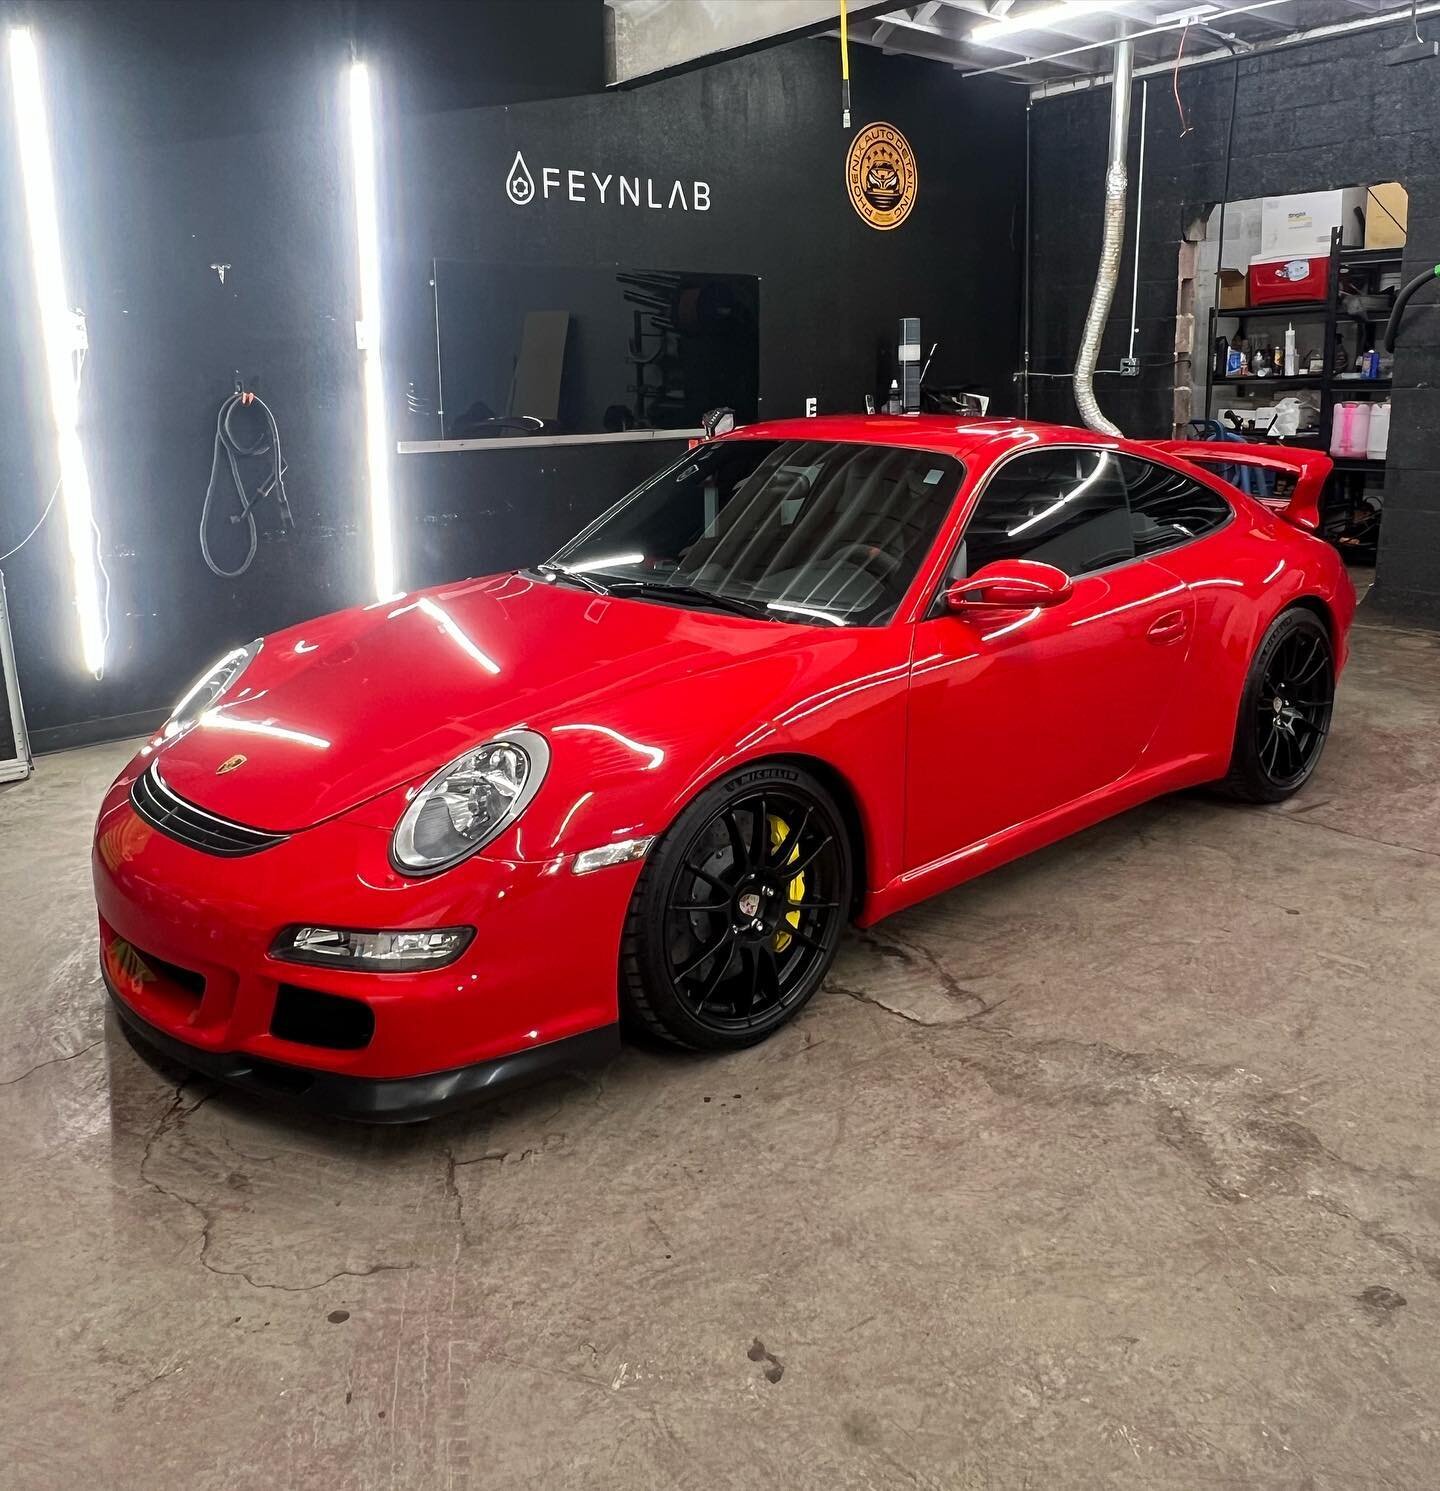 What are the benefits of a ceramic coating?
Ceramic coating your vehicle creates a hard, chemically-bonded protective layer over the paint. This hydrophobic layer makes the surface incredibly easy to wash and maintain as well as providing chemical an